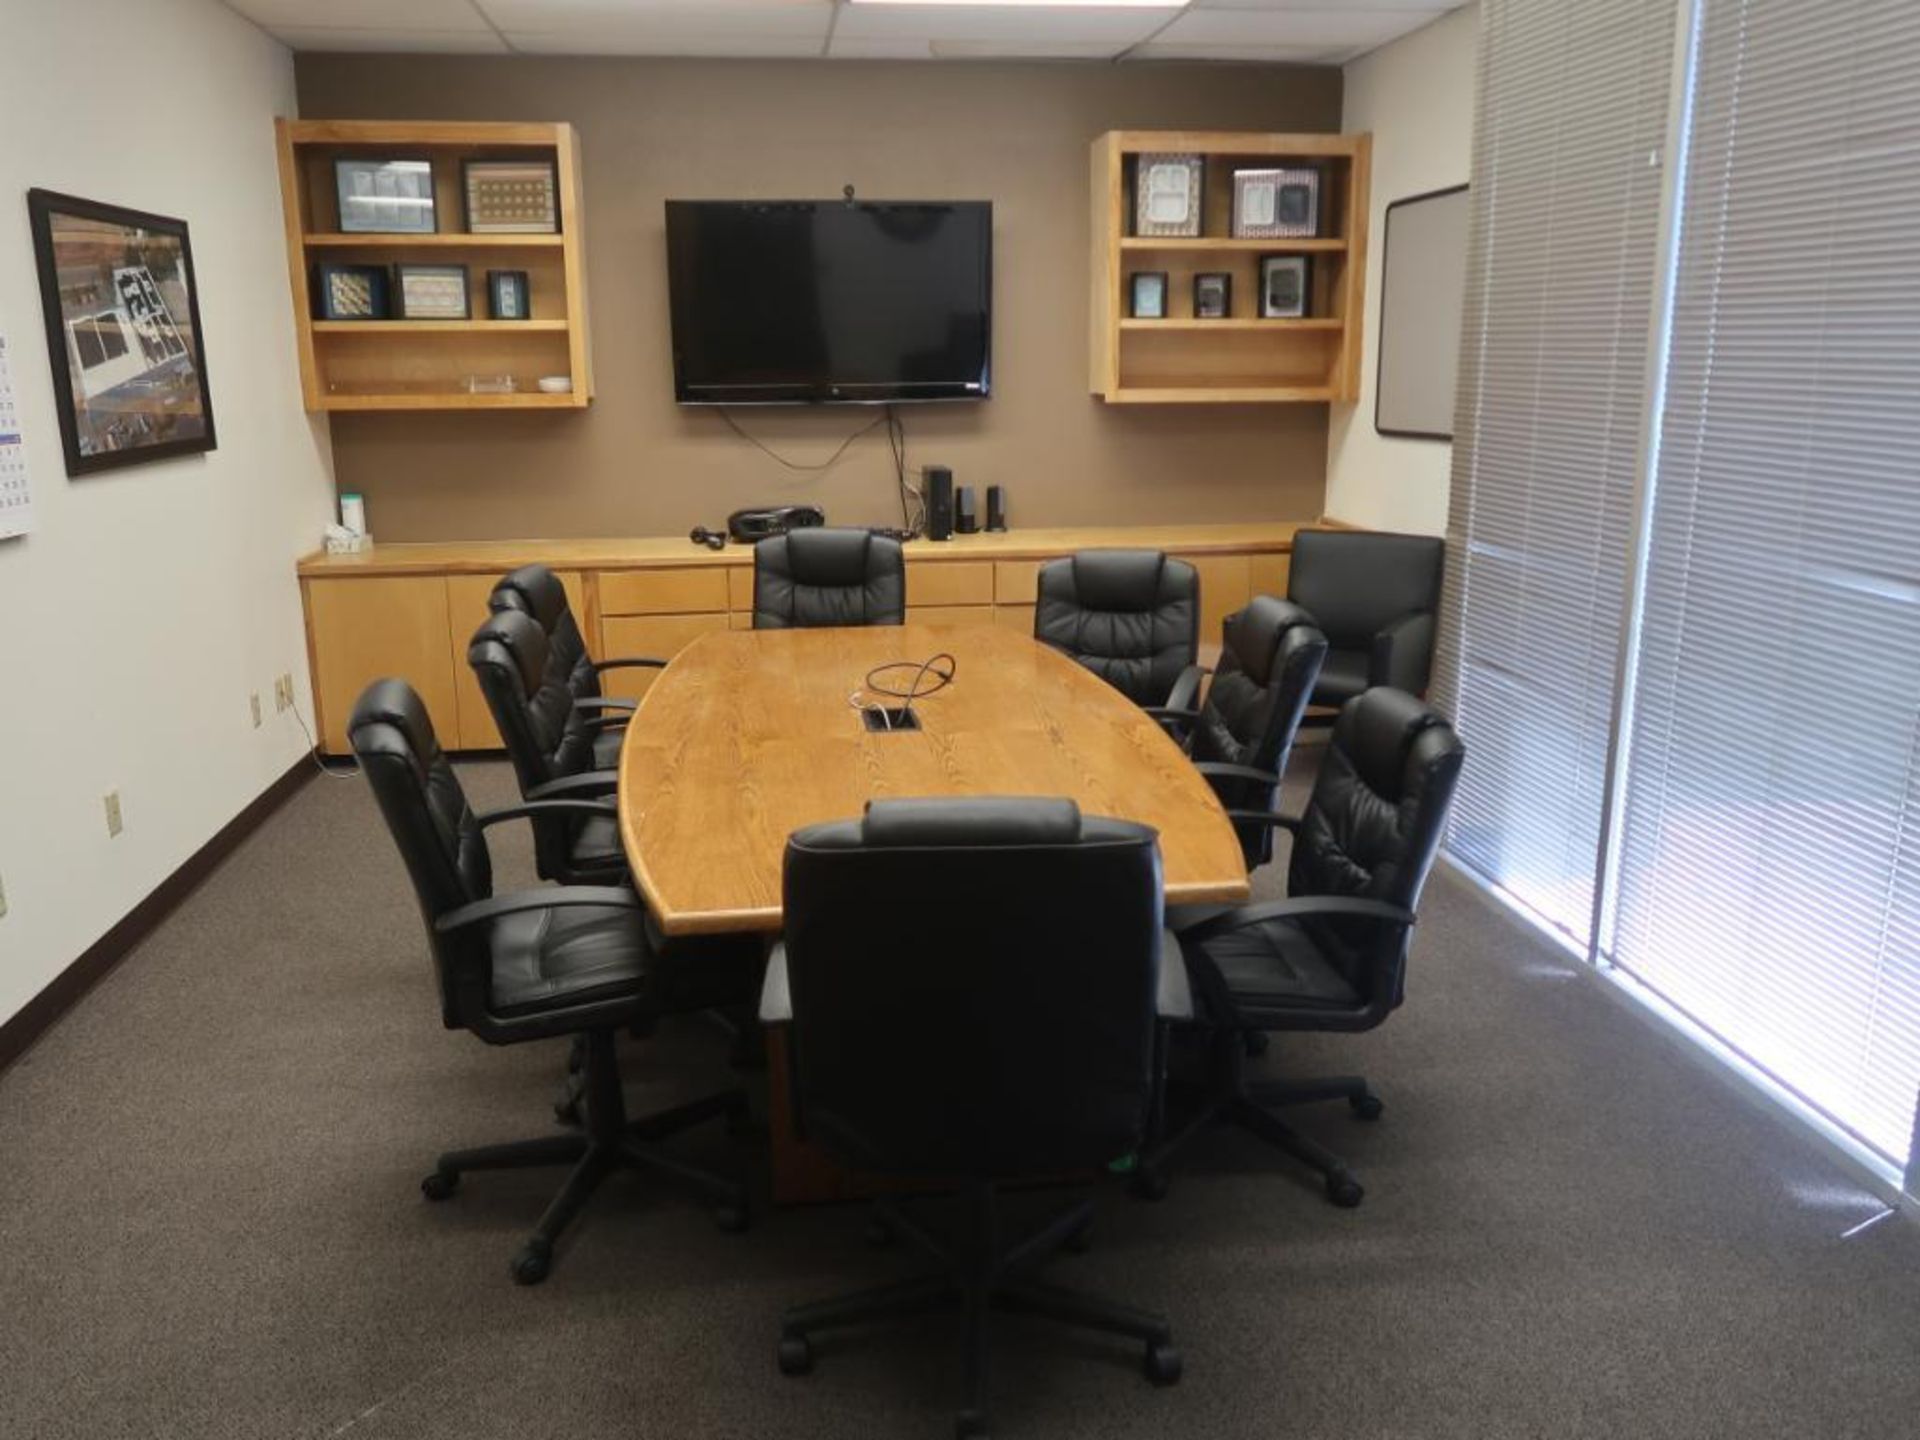 LOT: Contents of Conference Room: Television, Audio/Visual Equipment, Table, (8) Chairs, White Board